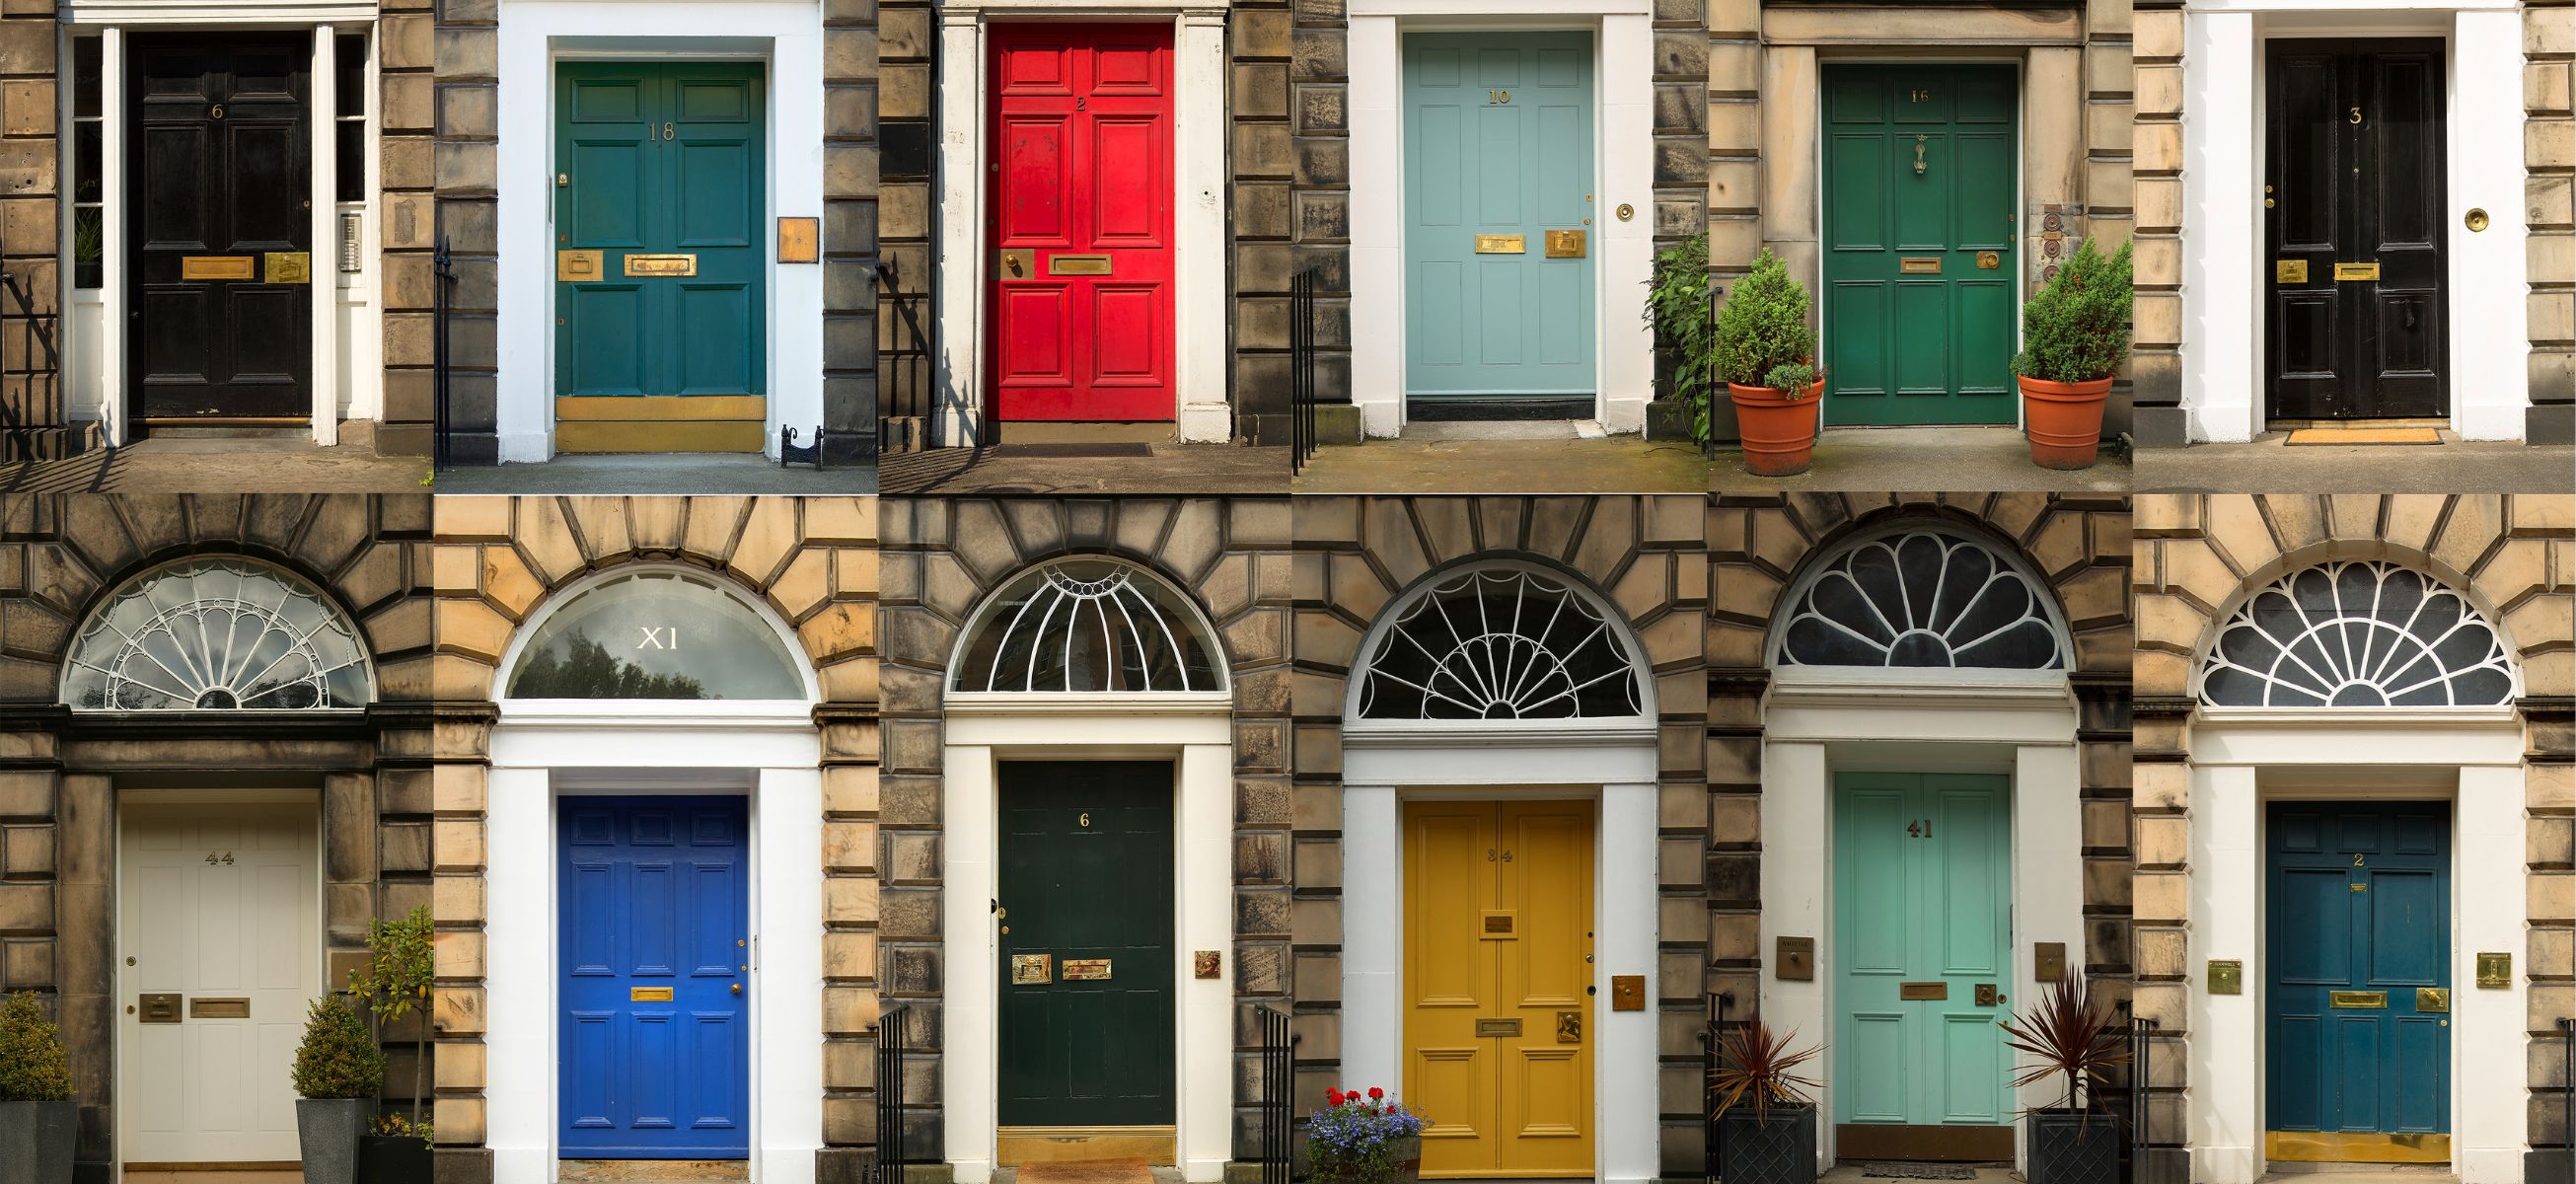 Feng Shui Tips for a Strong Front Door